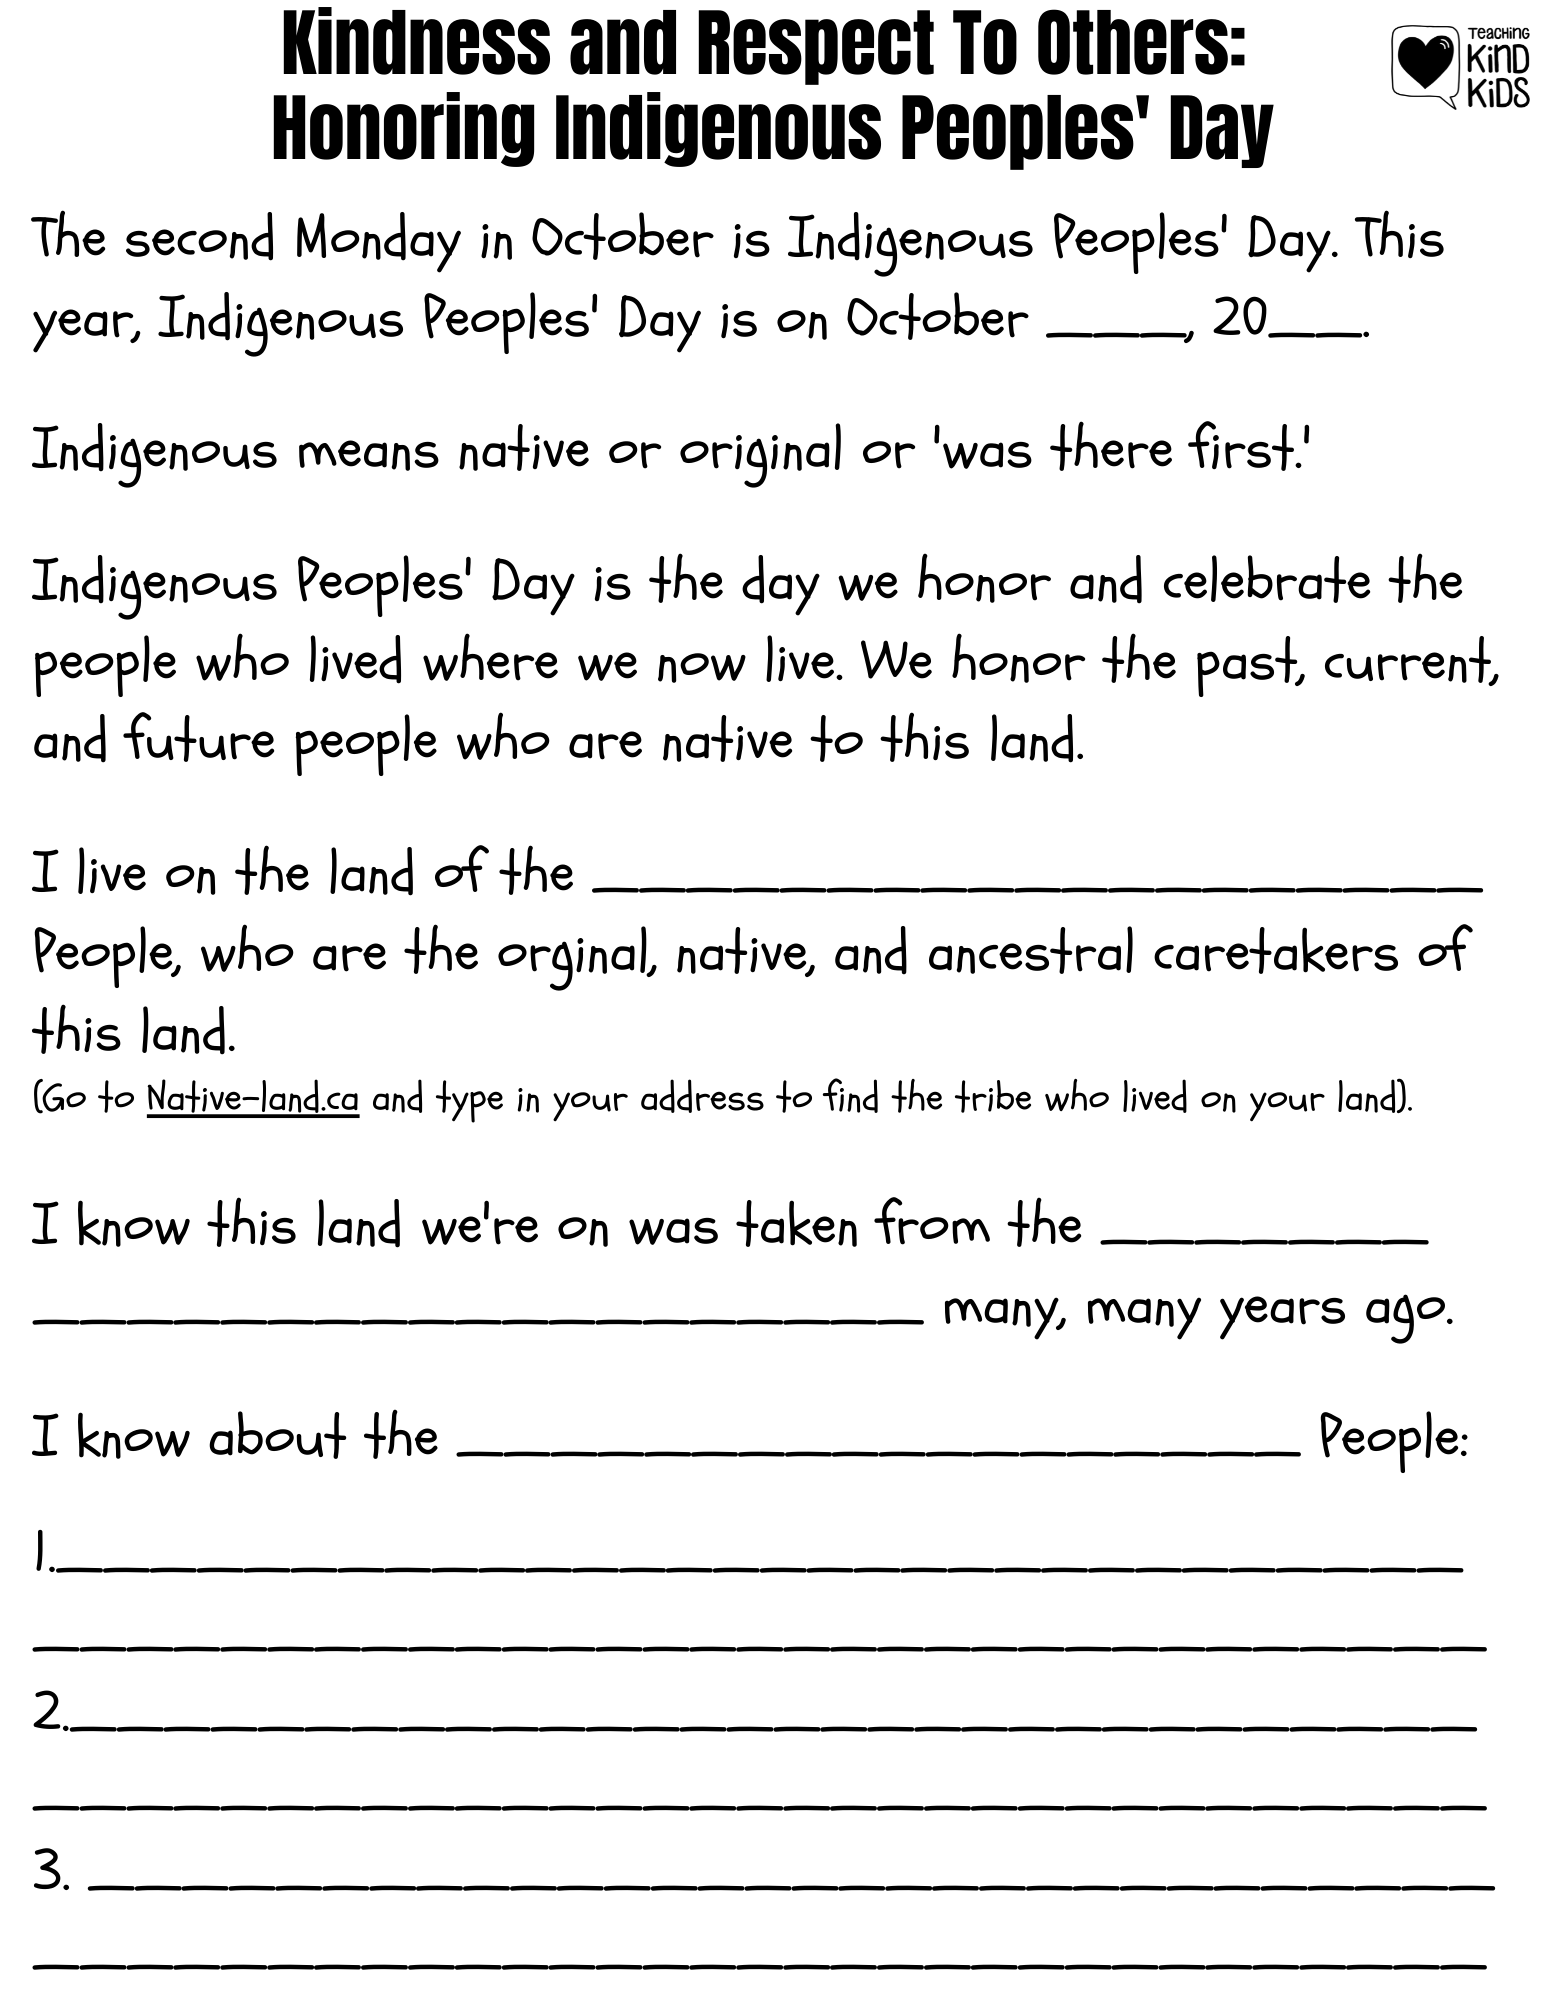 Honor and celebrate Indigenous Peoples' Day with this free printable to help students understand whose land they're living on in a respectful and kind way. 